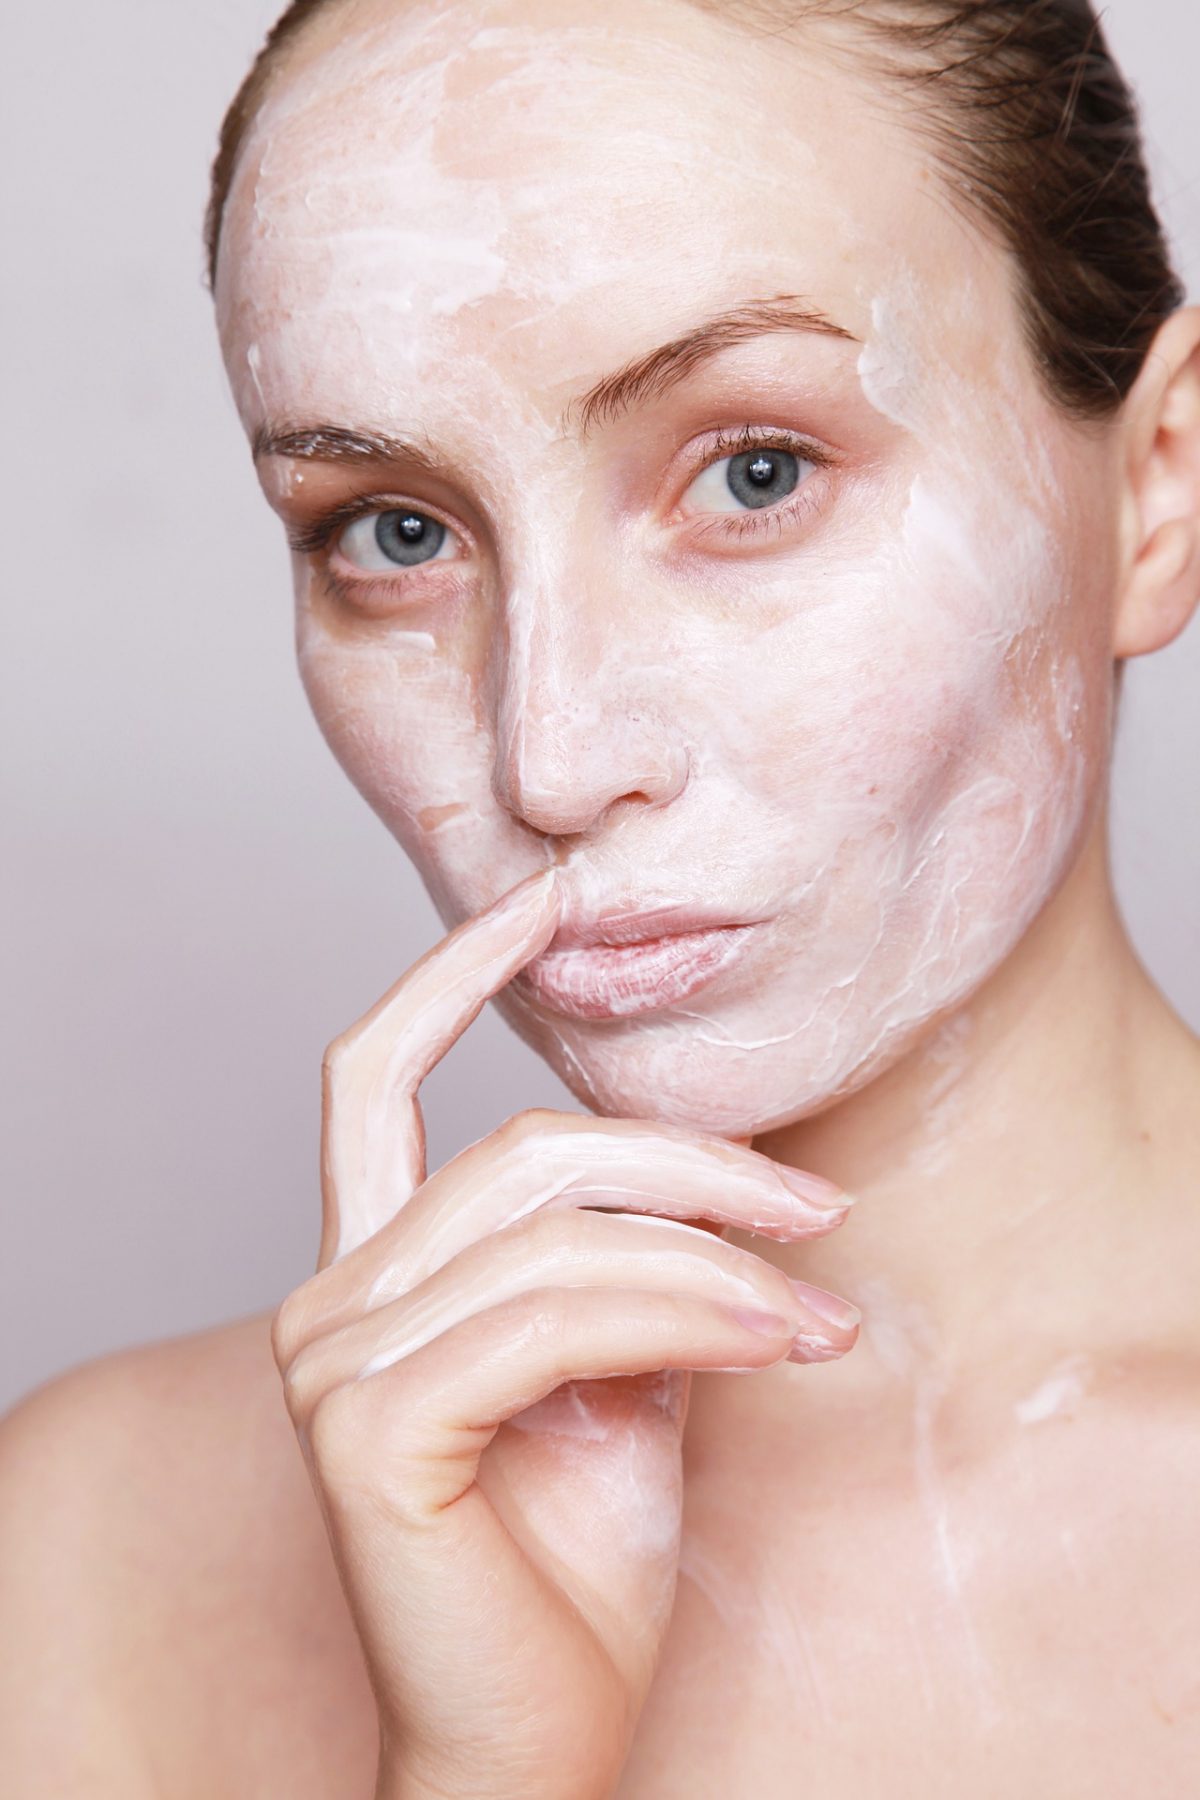 Tips For Buying The Best Acne Products